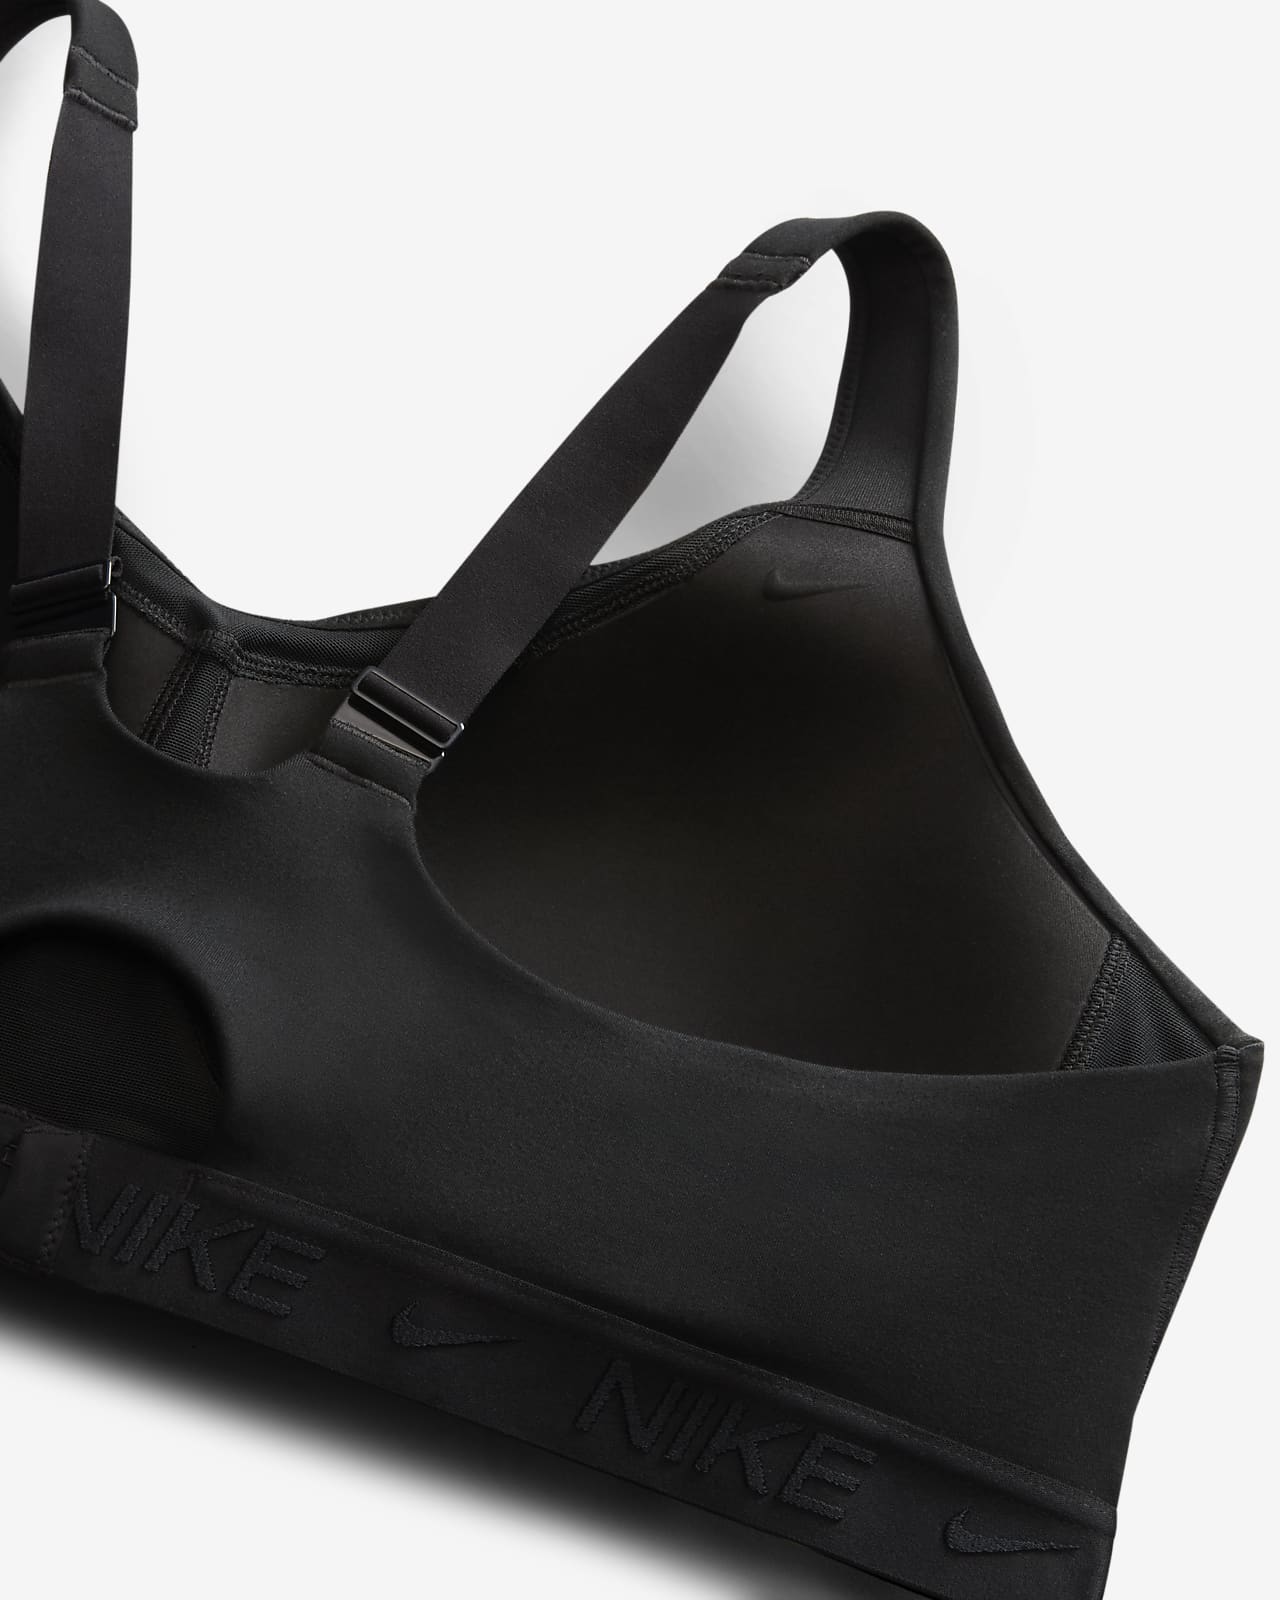 Nike Indy High-Support Women's Padded Adjustable Sports Bra (Plus Size)